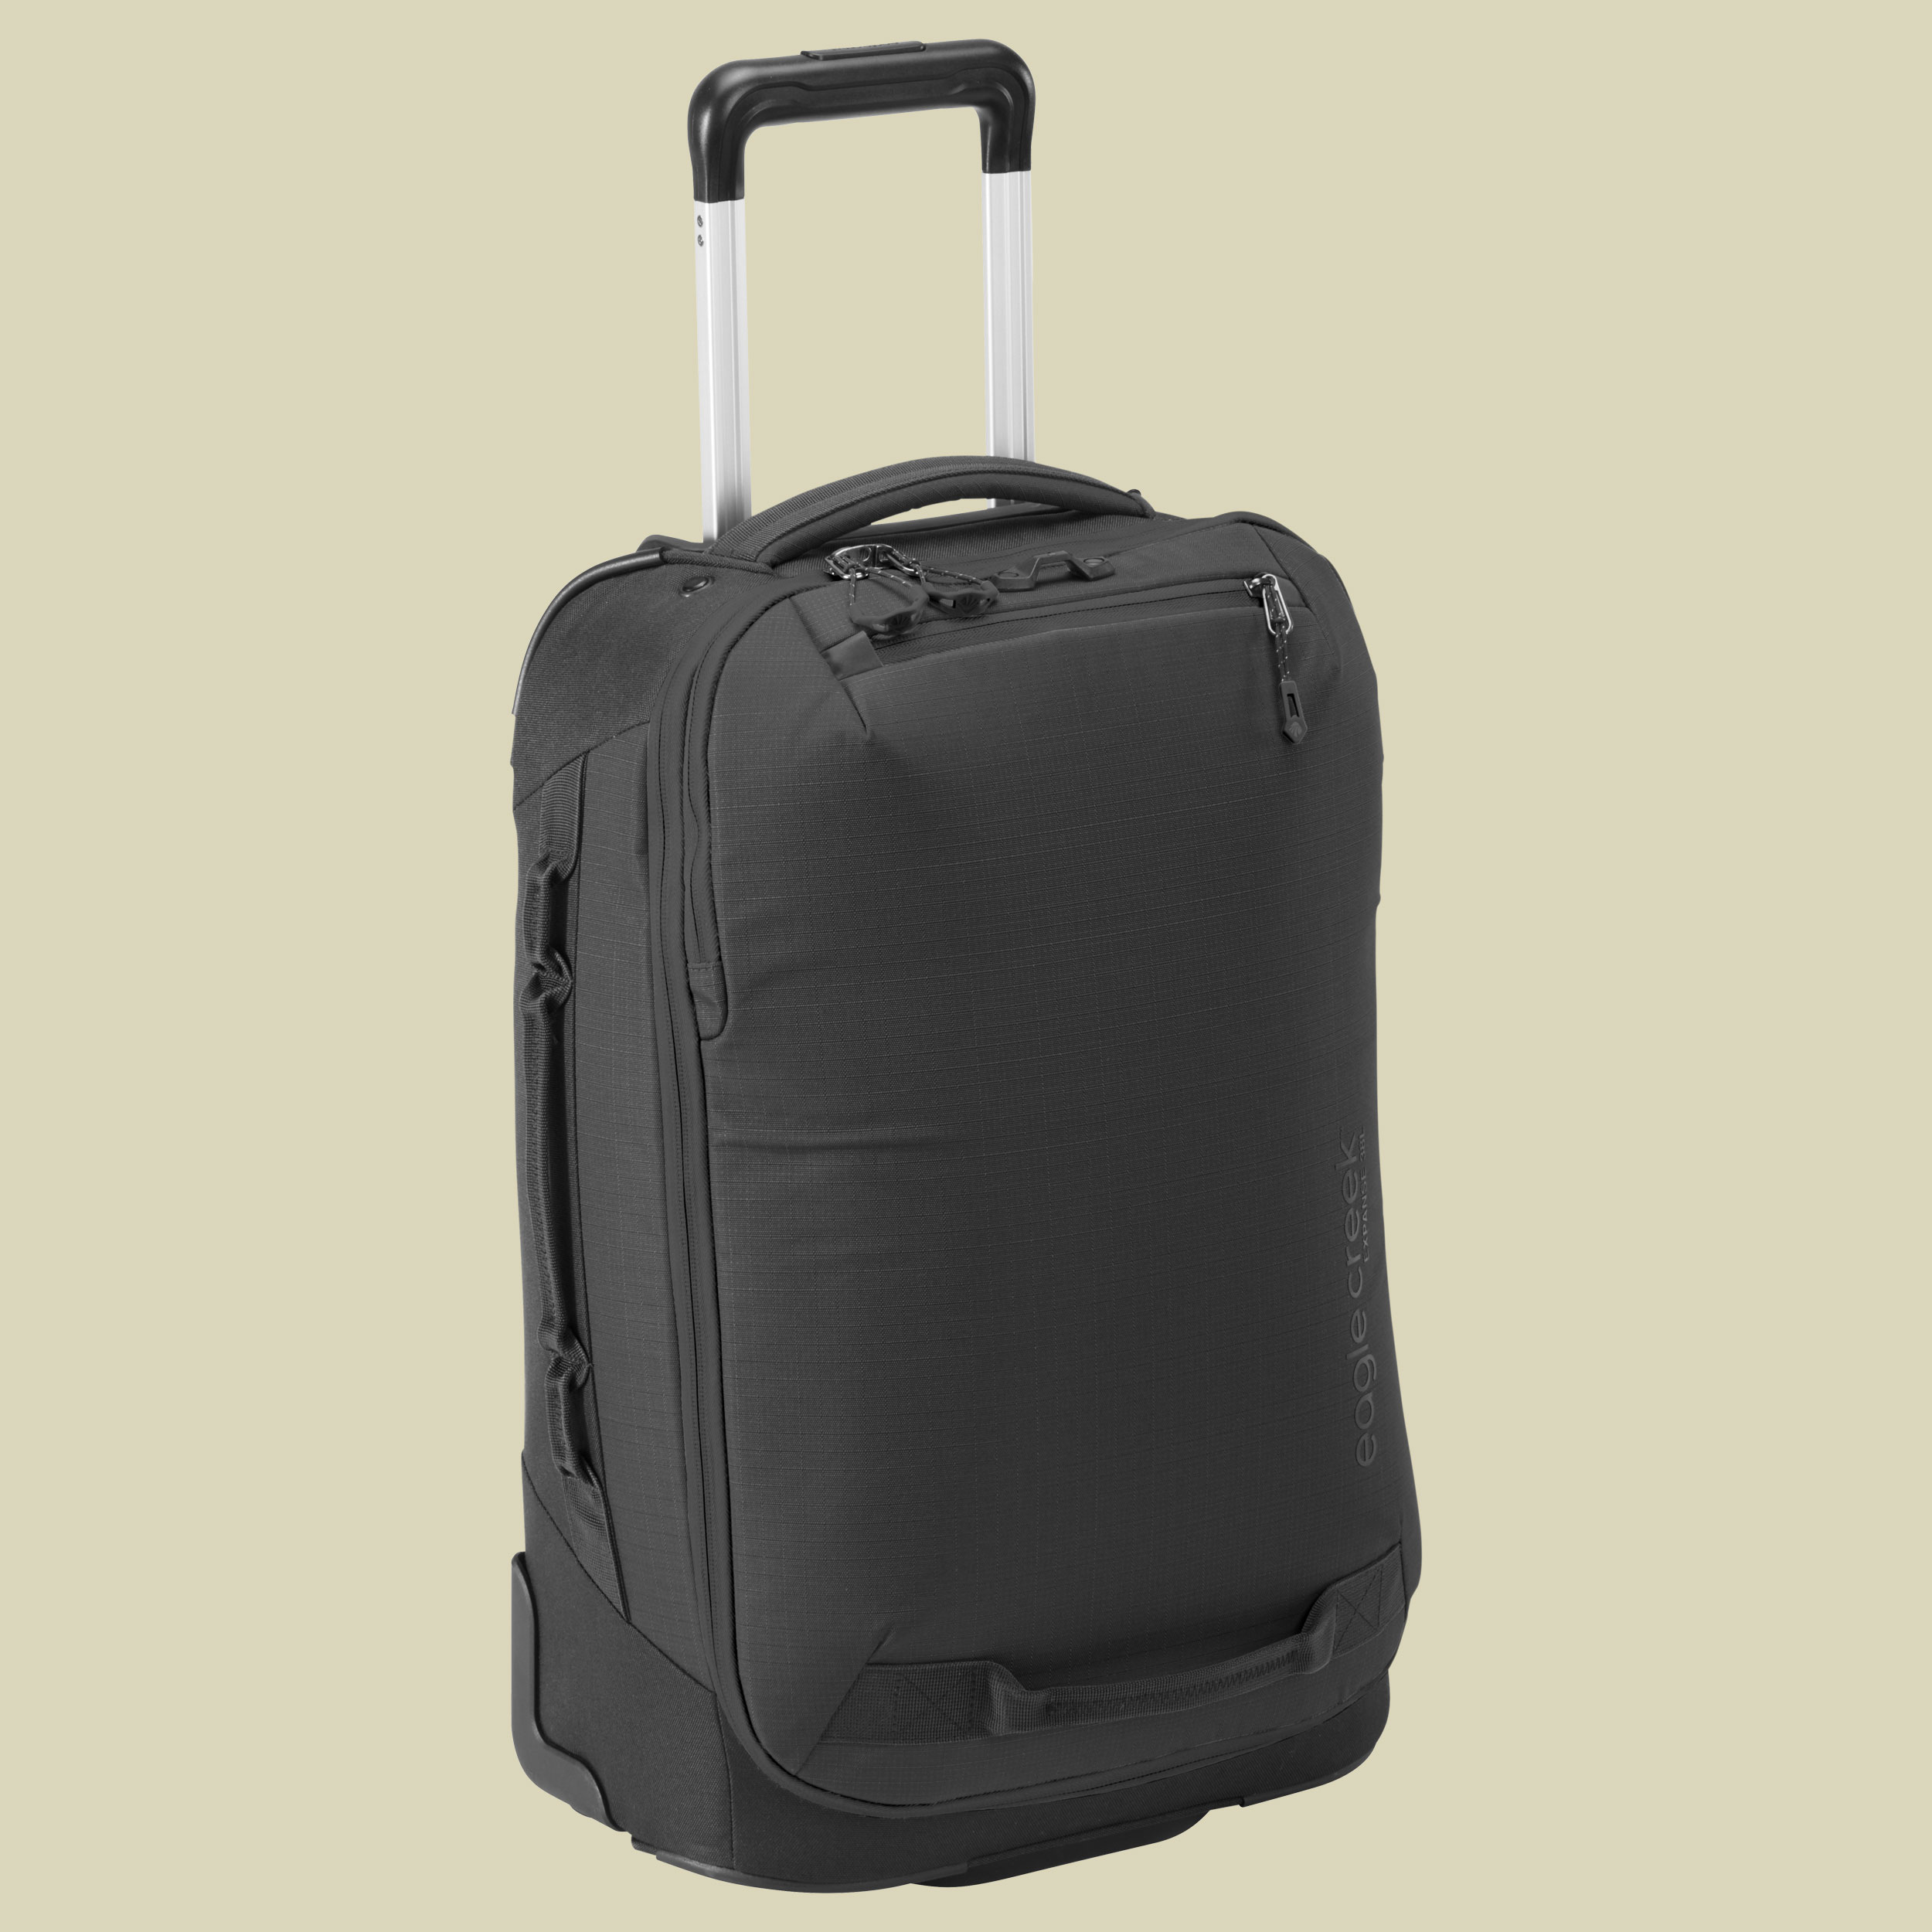 Expanse Convertible International Carry On